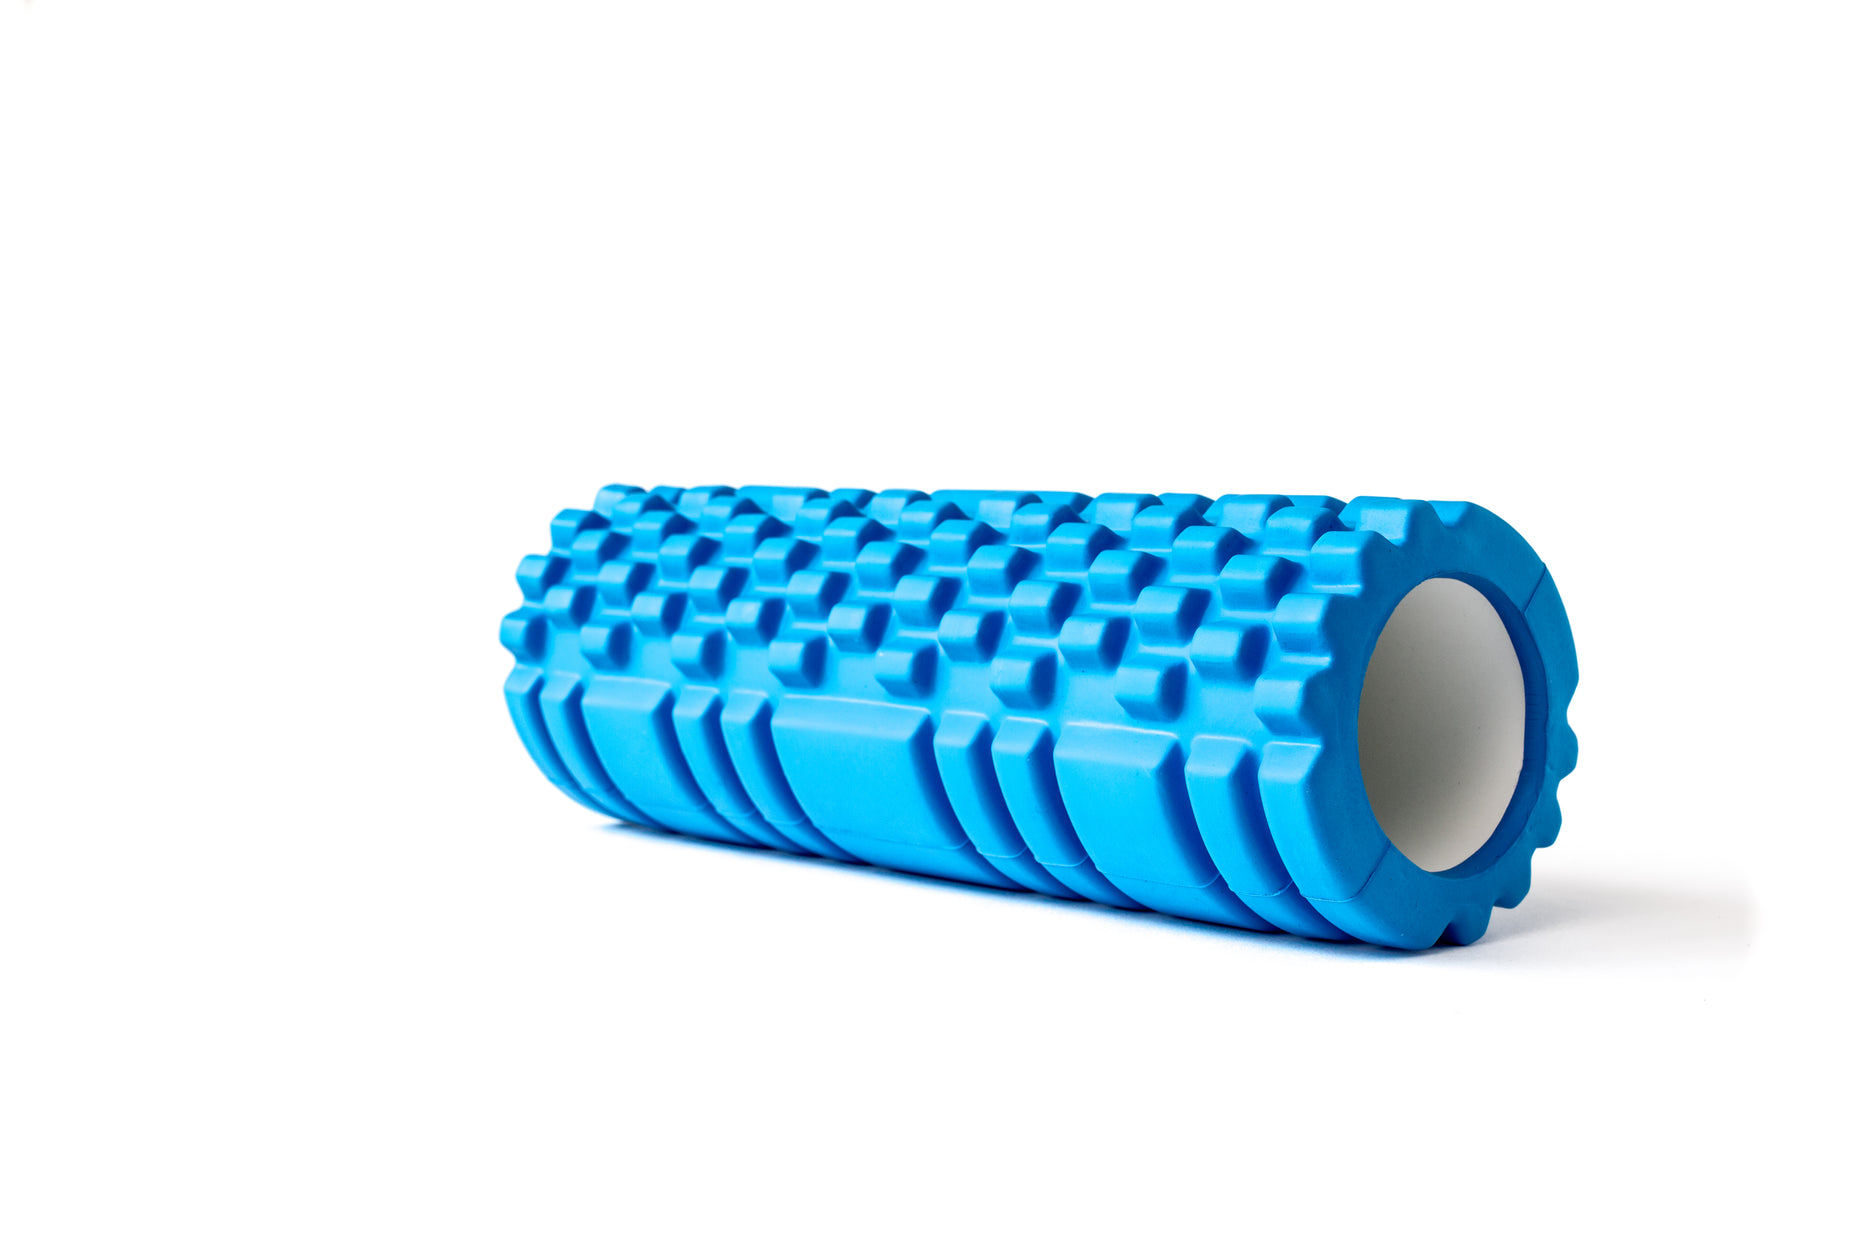 a blue rubber exercise foam roller on a white background